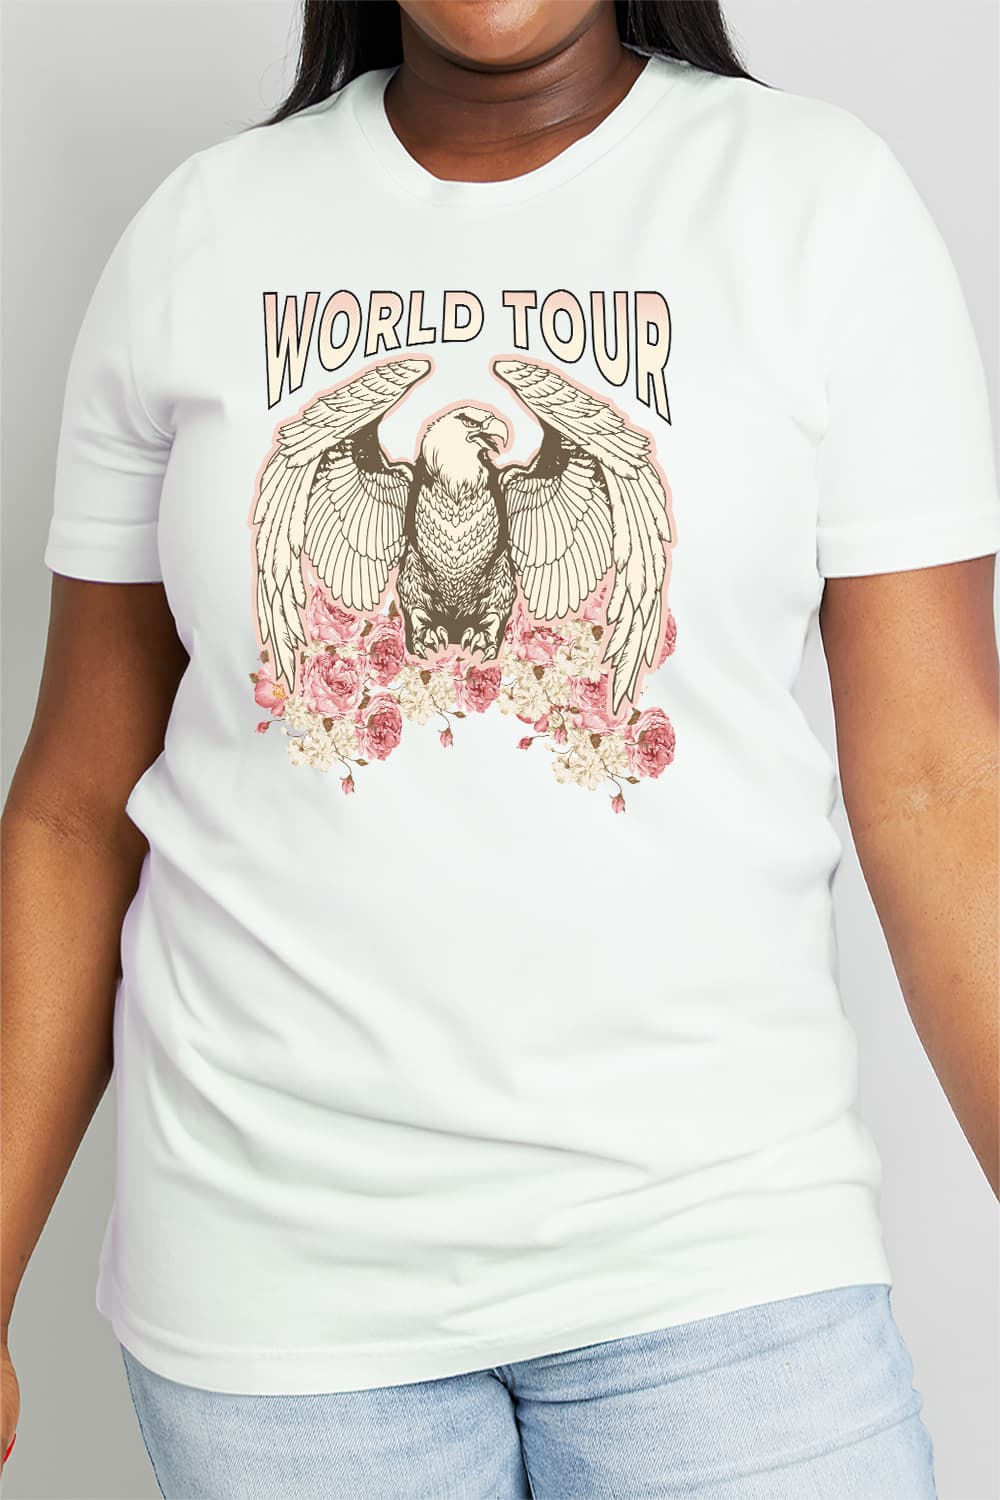 Simply Love Full Size WORLD TOUR Eagle Graphic Cotton Tee